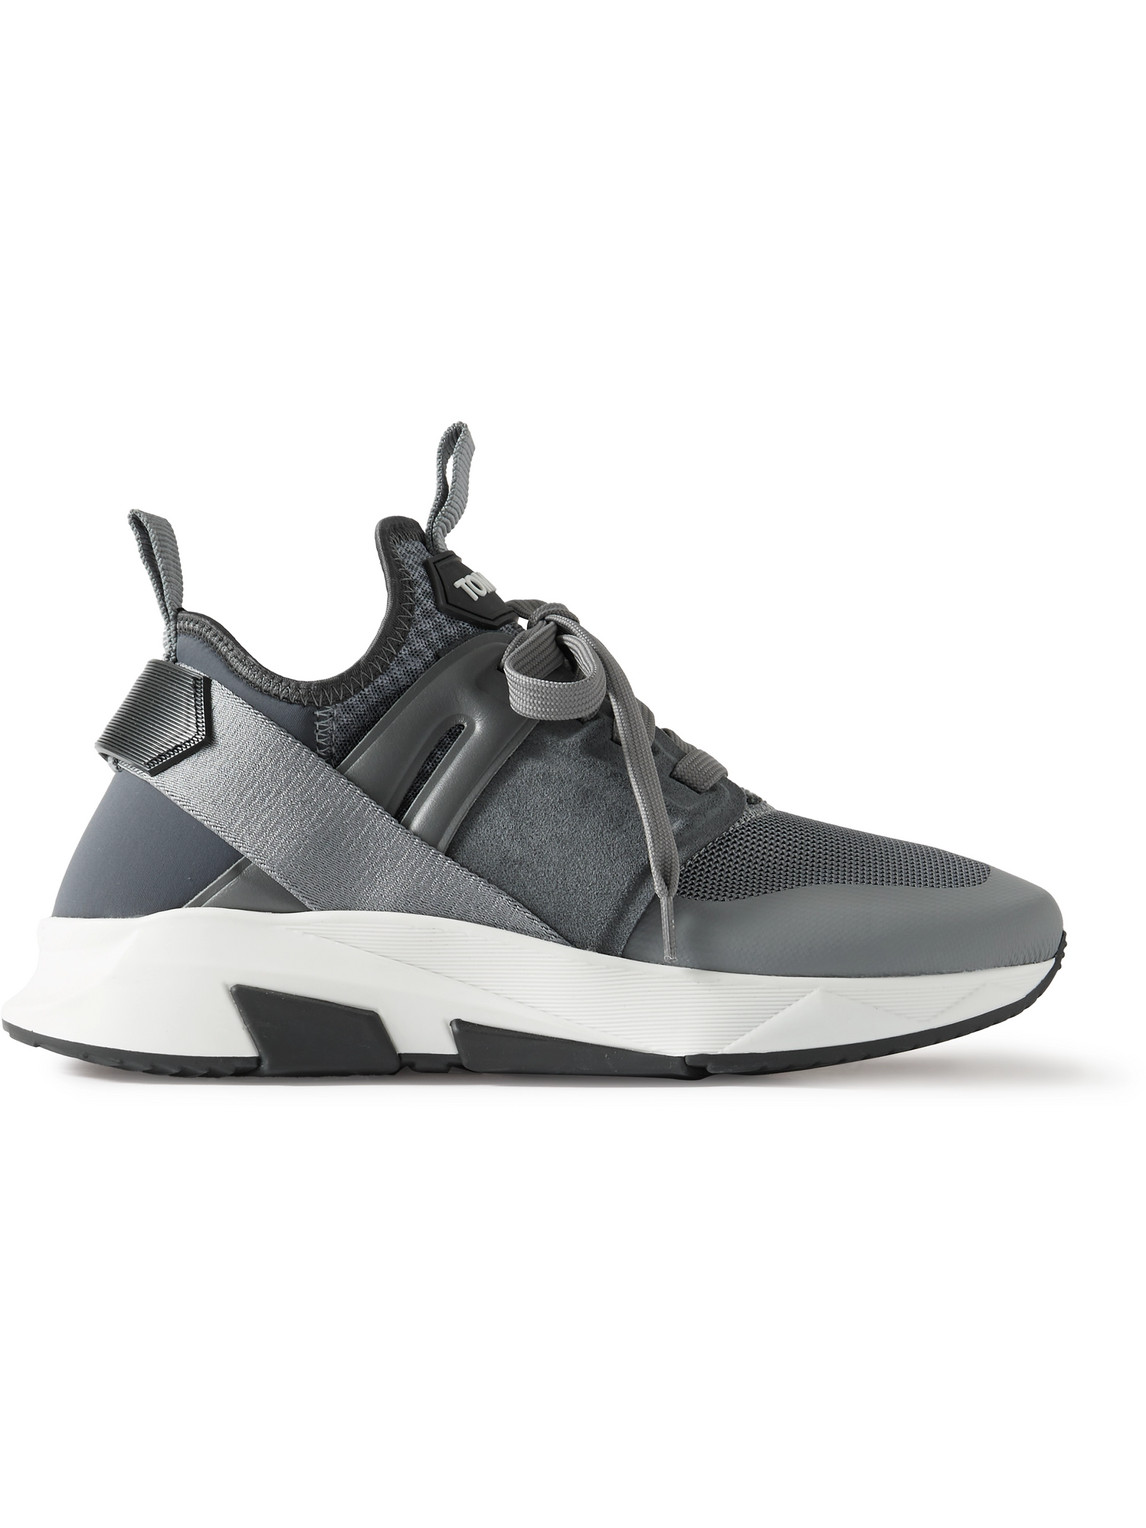 Tom Ford Jago Neoprene, Mesh, Nylon And Leather Sneakers In Gray